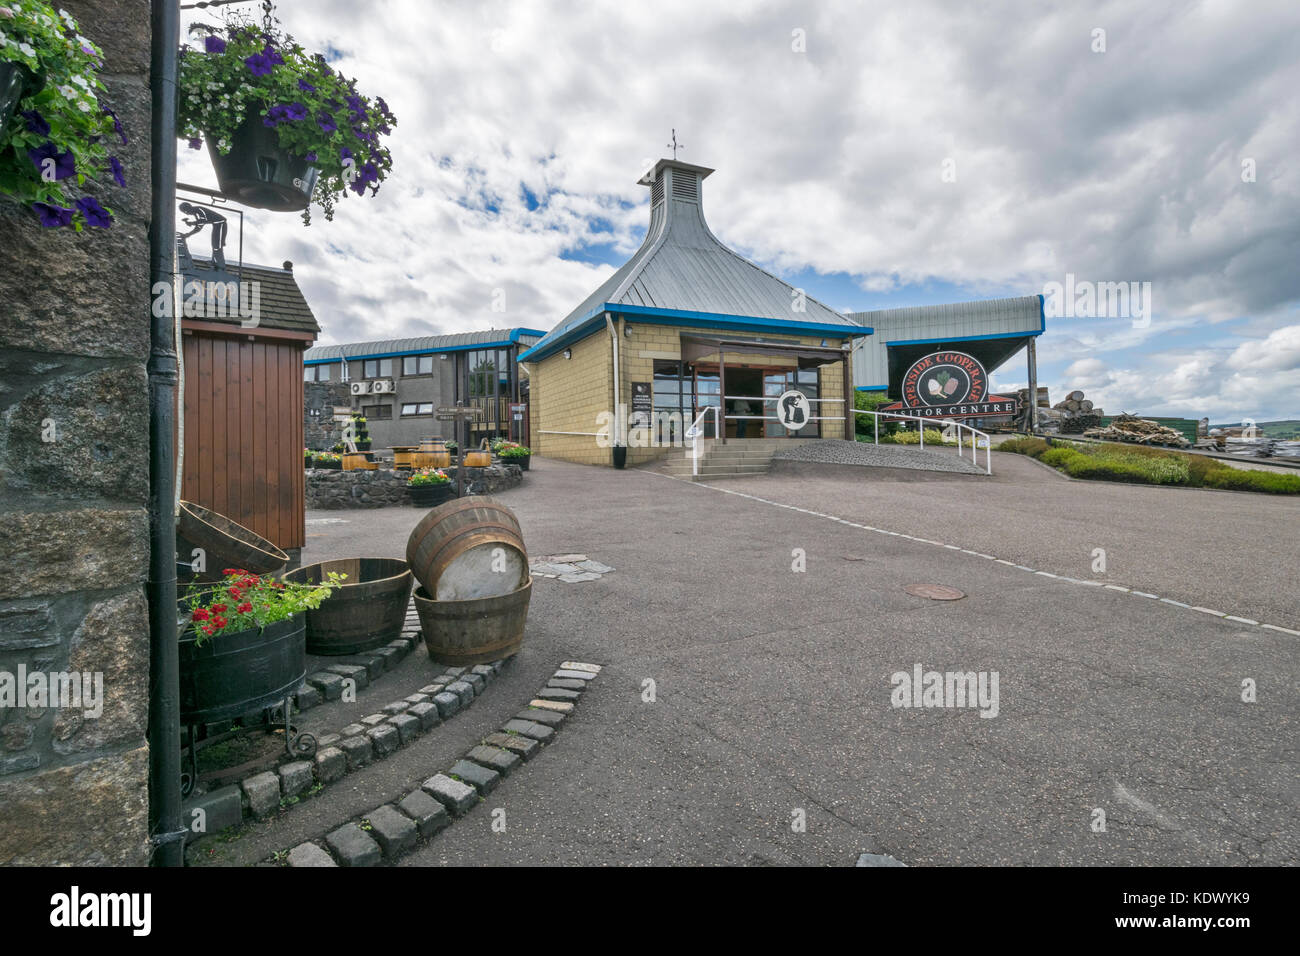 SPEYSIDE COOPERAGE DUFFTOWN SCOTLAND  ENTRANCE TO THE VISITOR CENTRE WITH WHISKY BARRELS AND FLOWER BASKETS Stock Photo